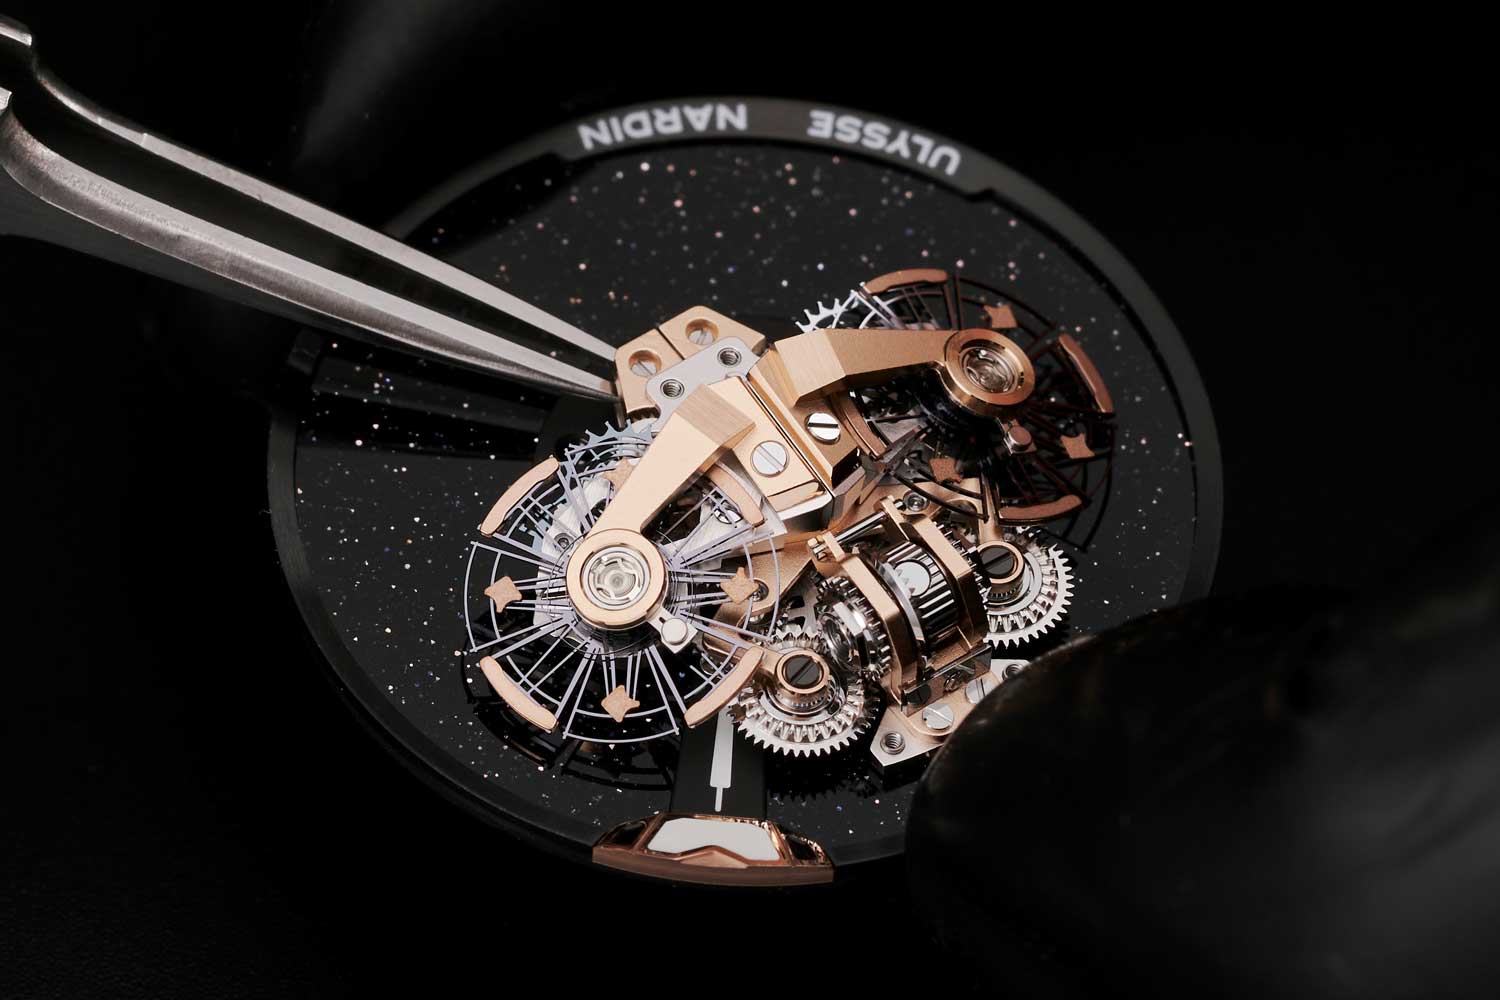 The technical wizardry of the new UN-251 movement s enhanced by a sci-fi architecture which is reminiscent of a spaceship floating in space. The craft’s pointy gold bow serves as the minute hand. A shuttle-like peripheral index indicates the hours. The aventurine disk underneath the astounding movement plays the role of the cosmo.